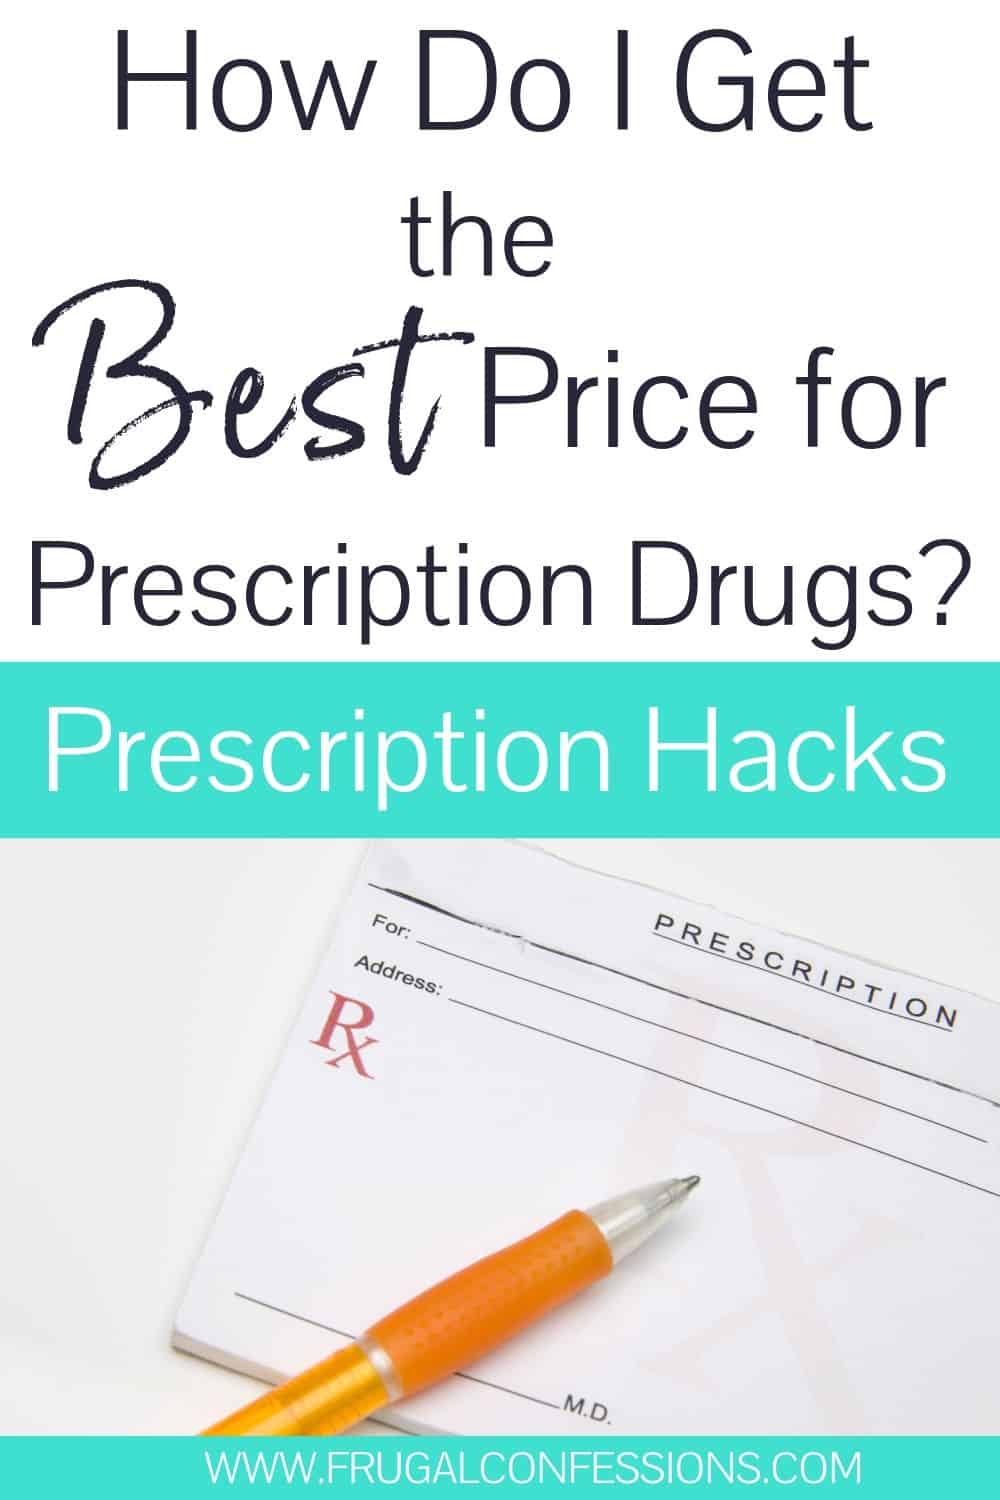 prescription pad with pen on white background, text overlay 